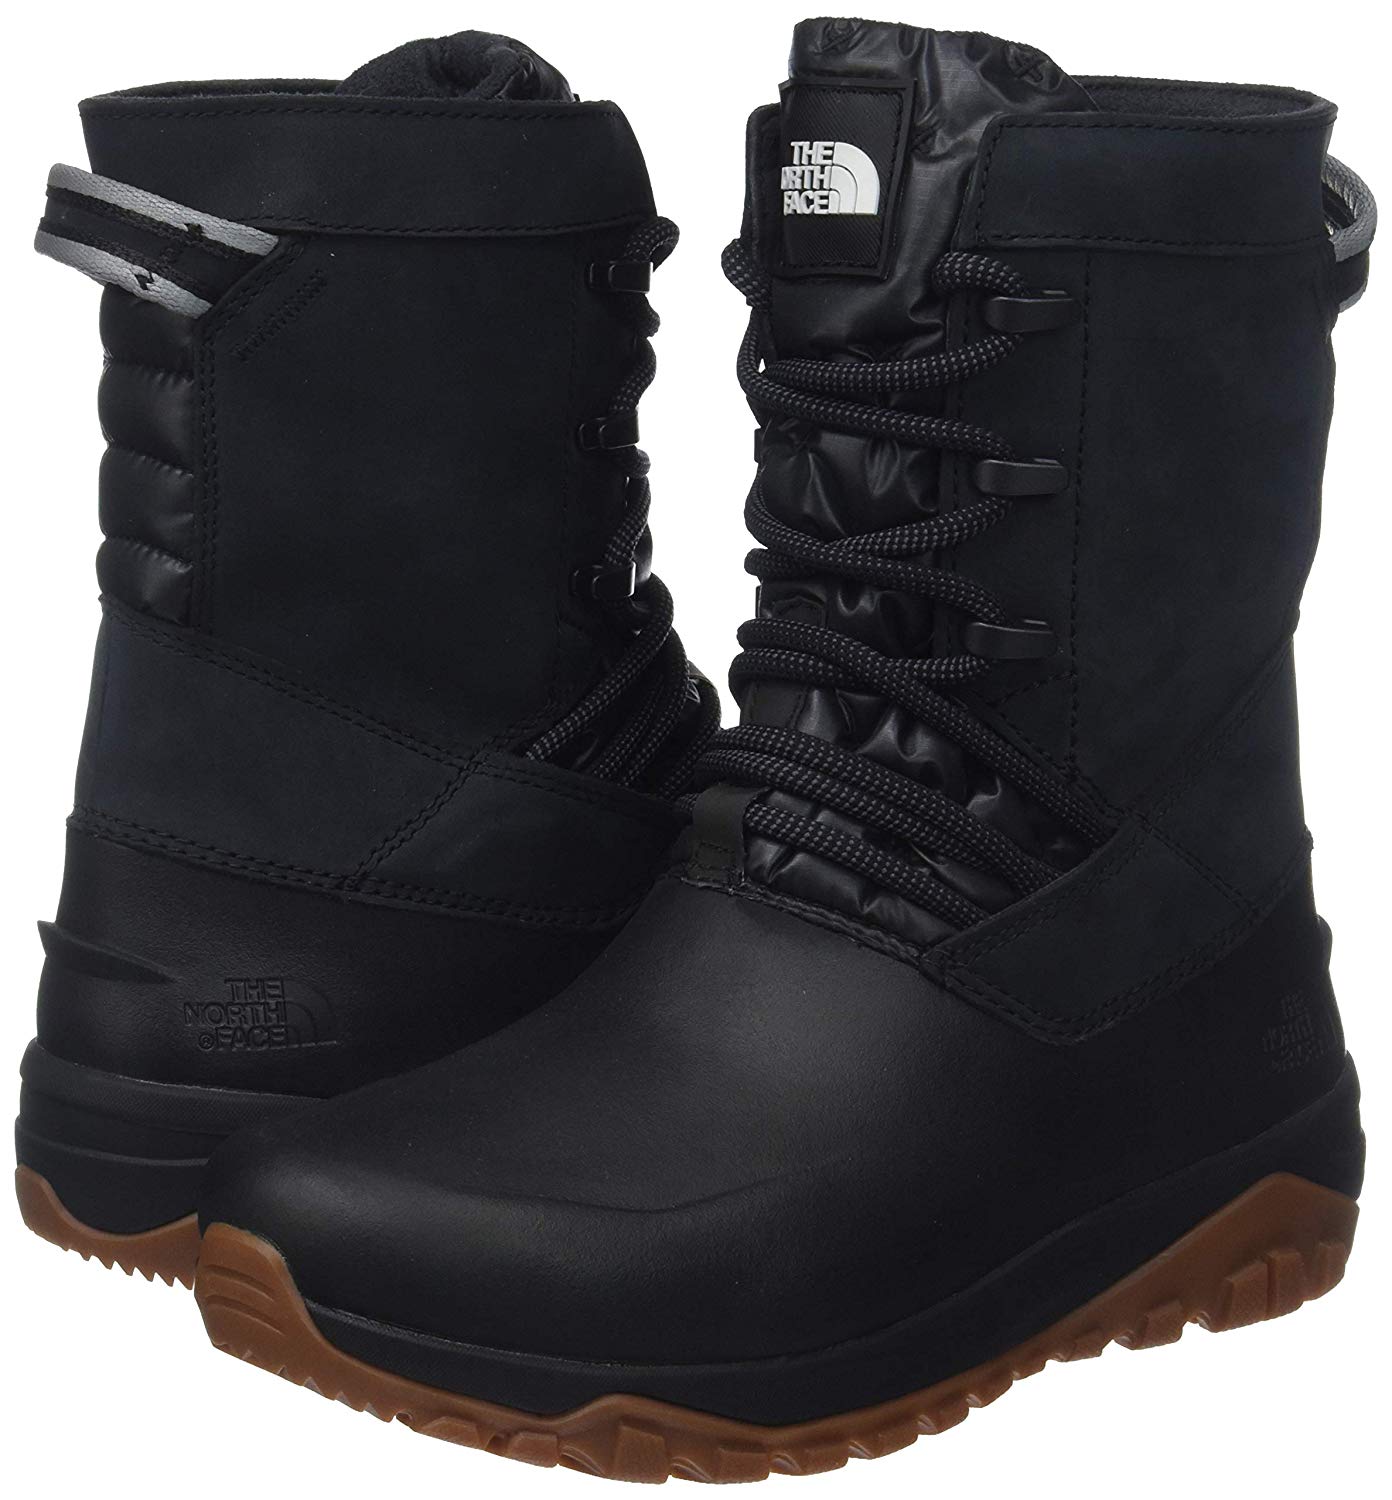 THE NORTH FACE Women’s Yukiona Mid High Boots NF0A3K3B The North Face ktmart 6